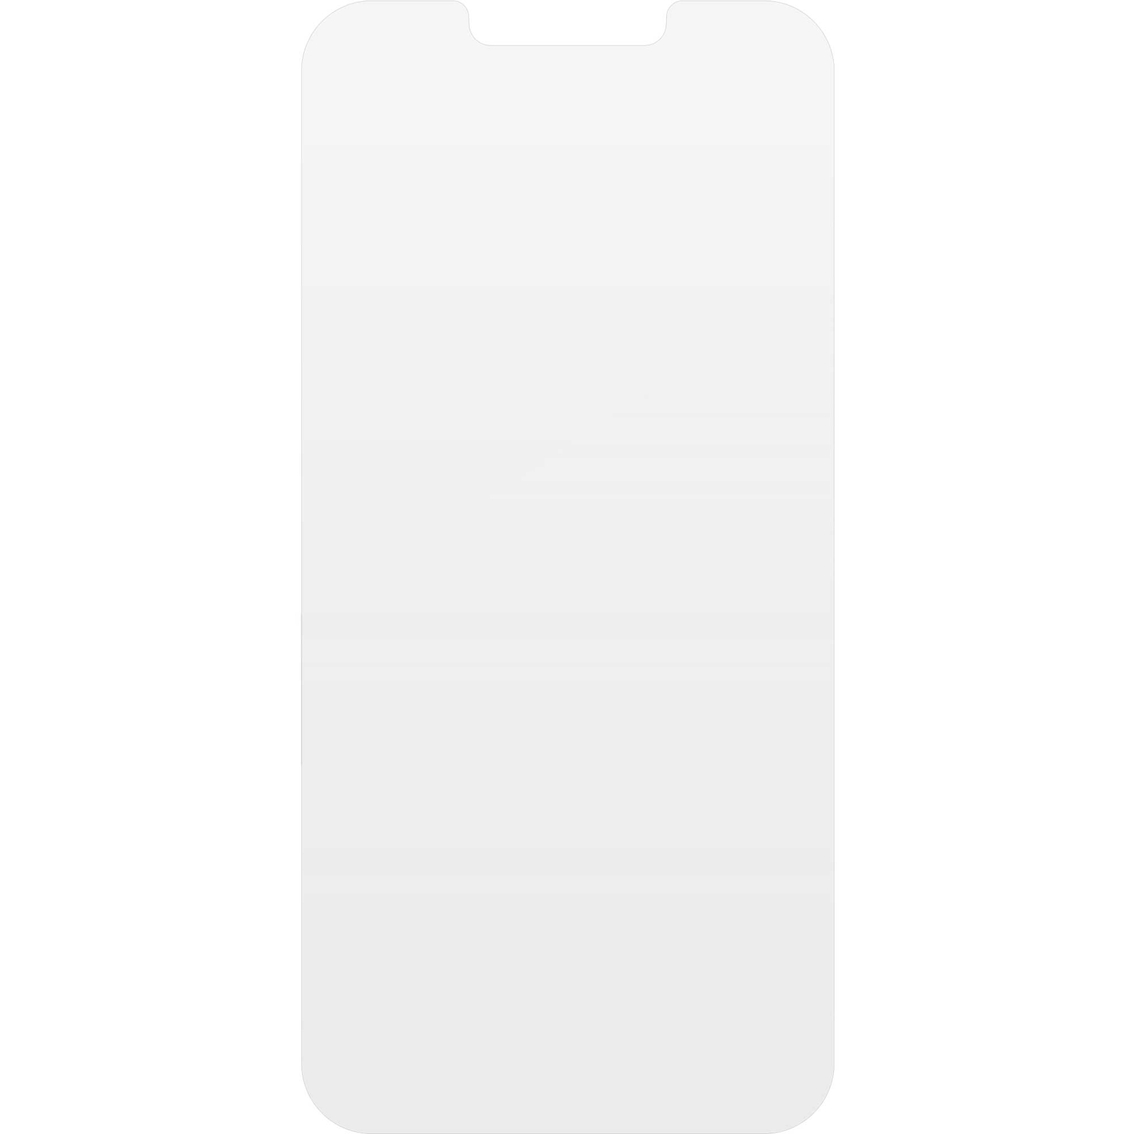 ZAGG InvisibleShield Glass Elite Screen Protection for iPhone14/iPhone 13 Pro - Image 2 of 2